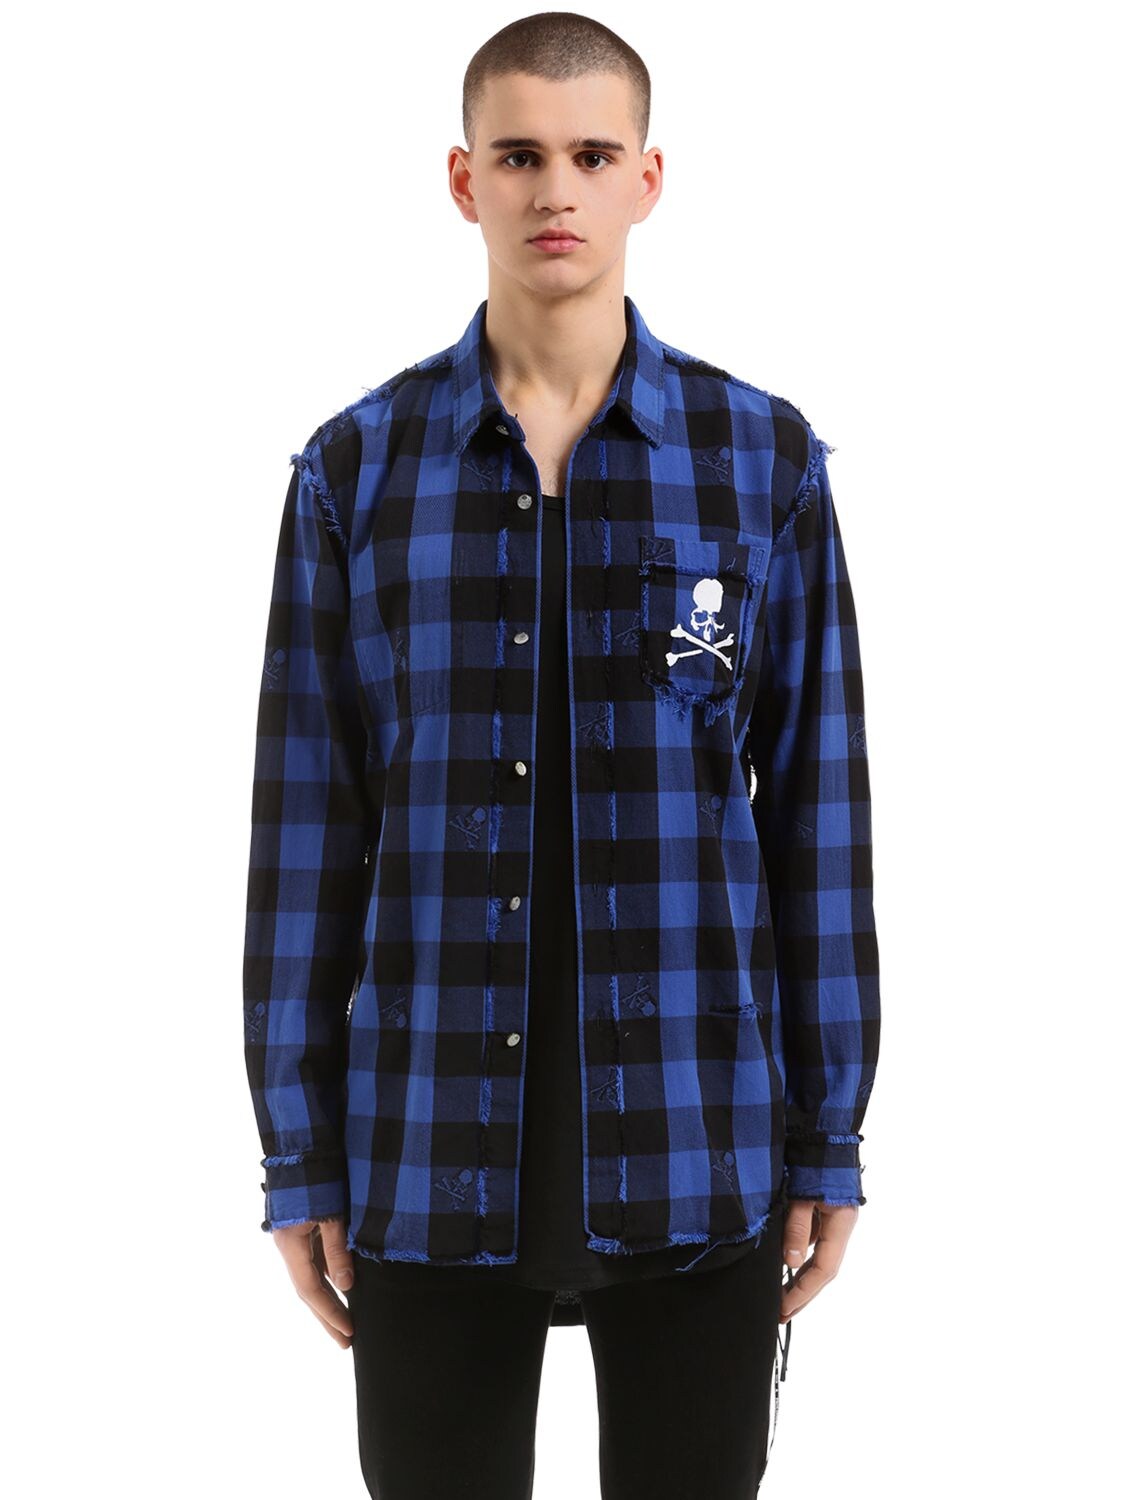 Mastermind Japan Skull Checked Cotton Flannel Shirt In Blue/black